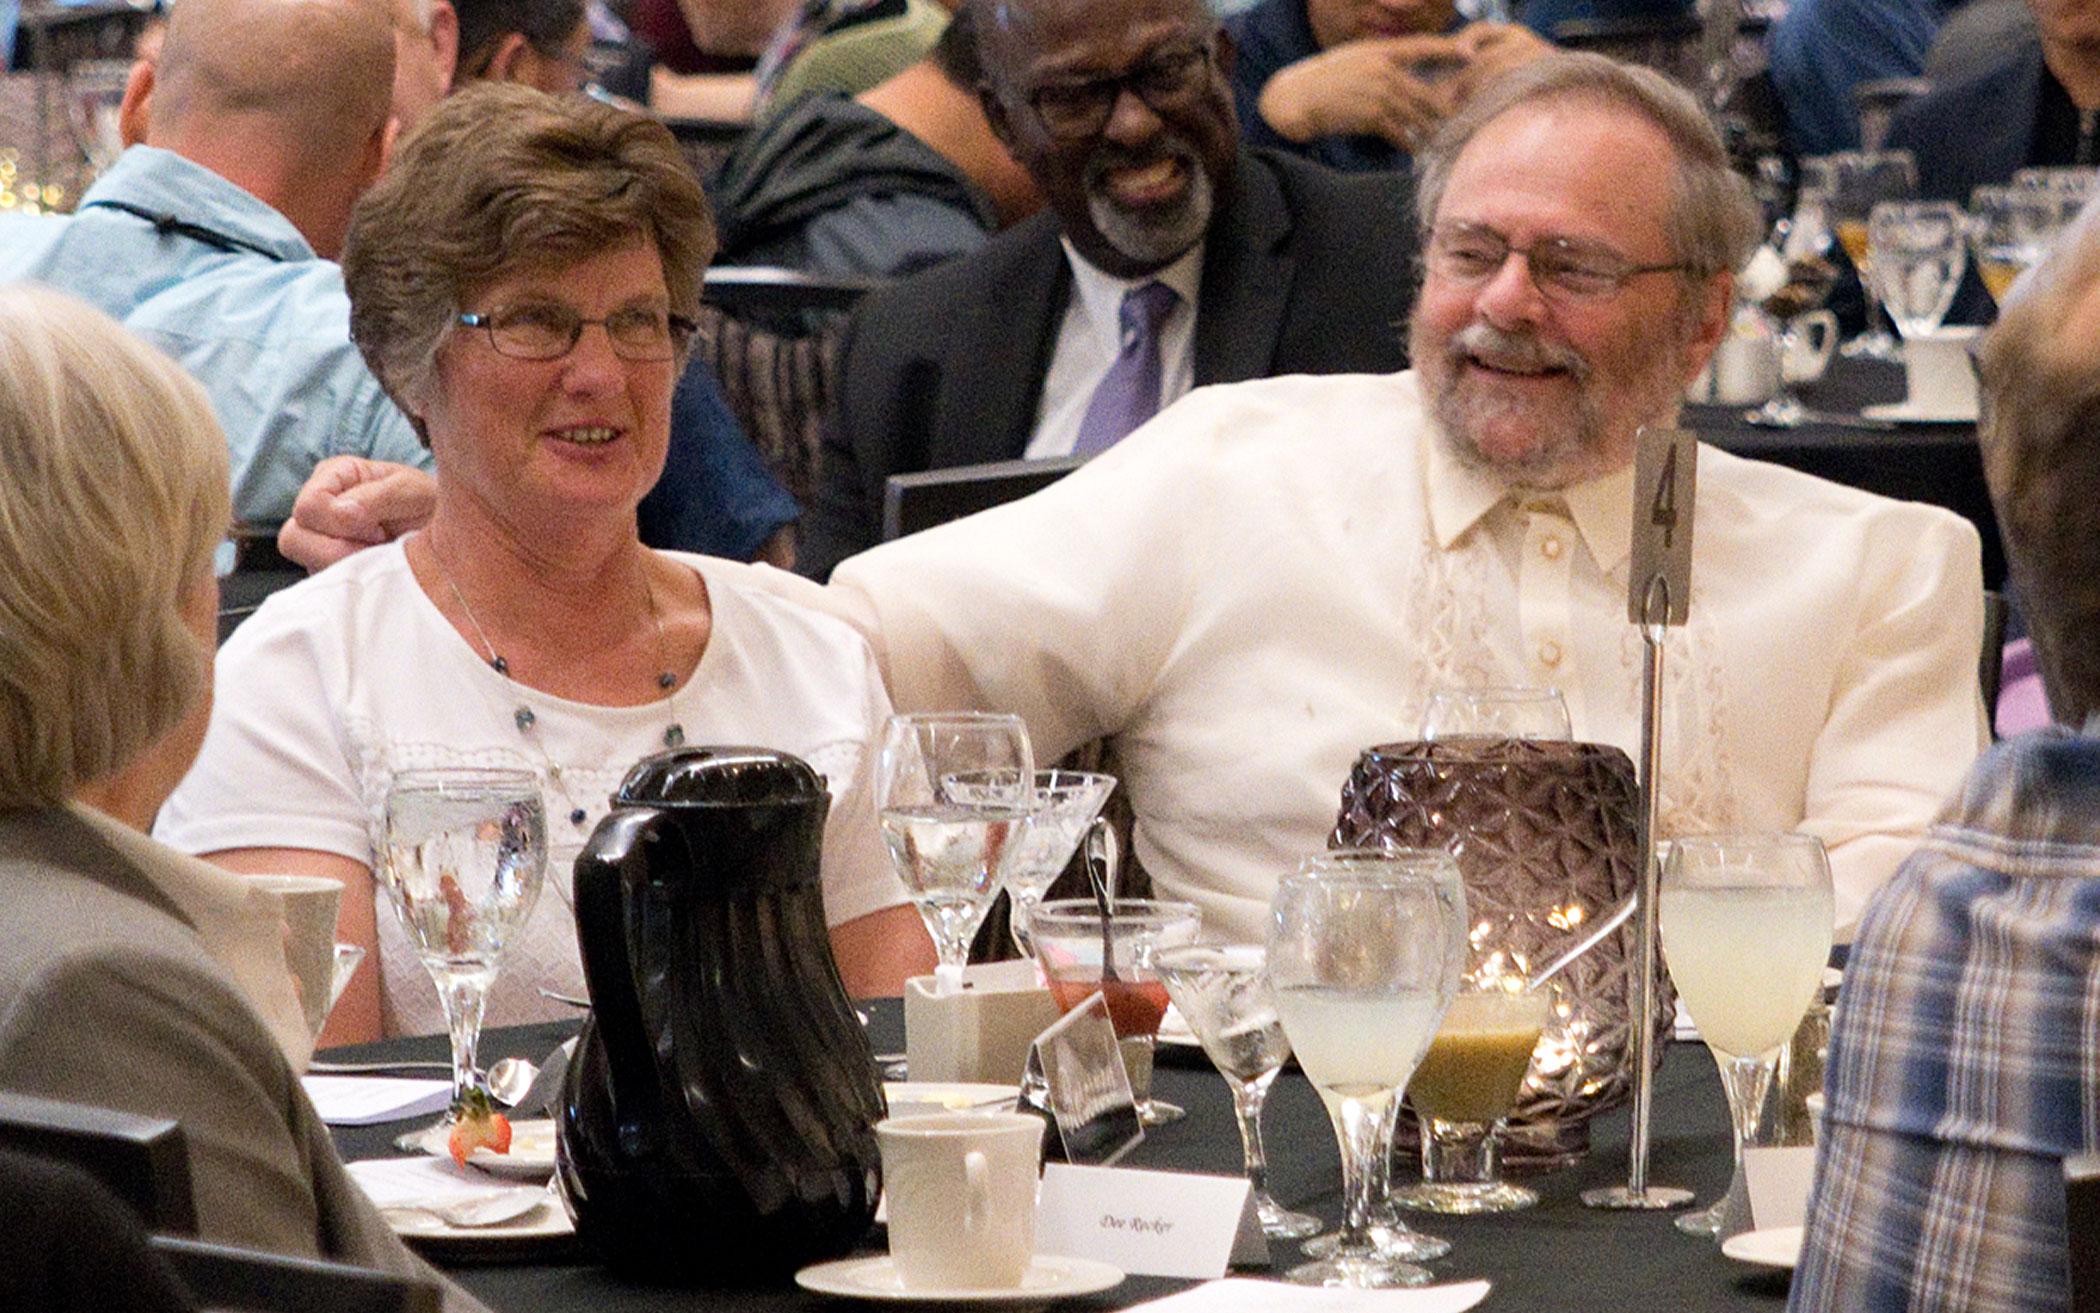 Norma and Gary Bekker (center) at the Synod 2019 banquet recognizing Gary’s retirement.
